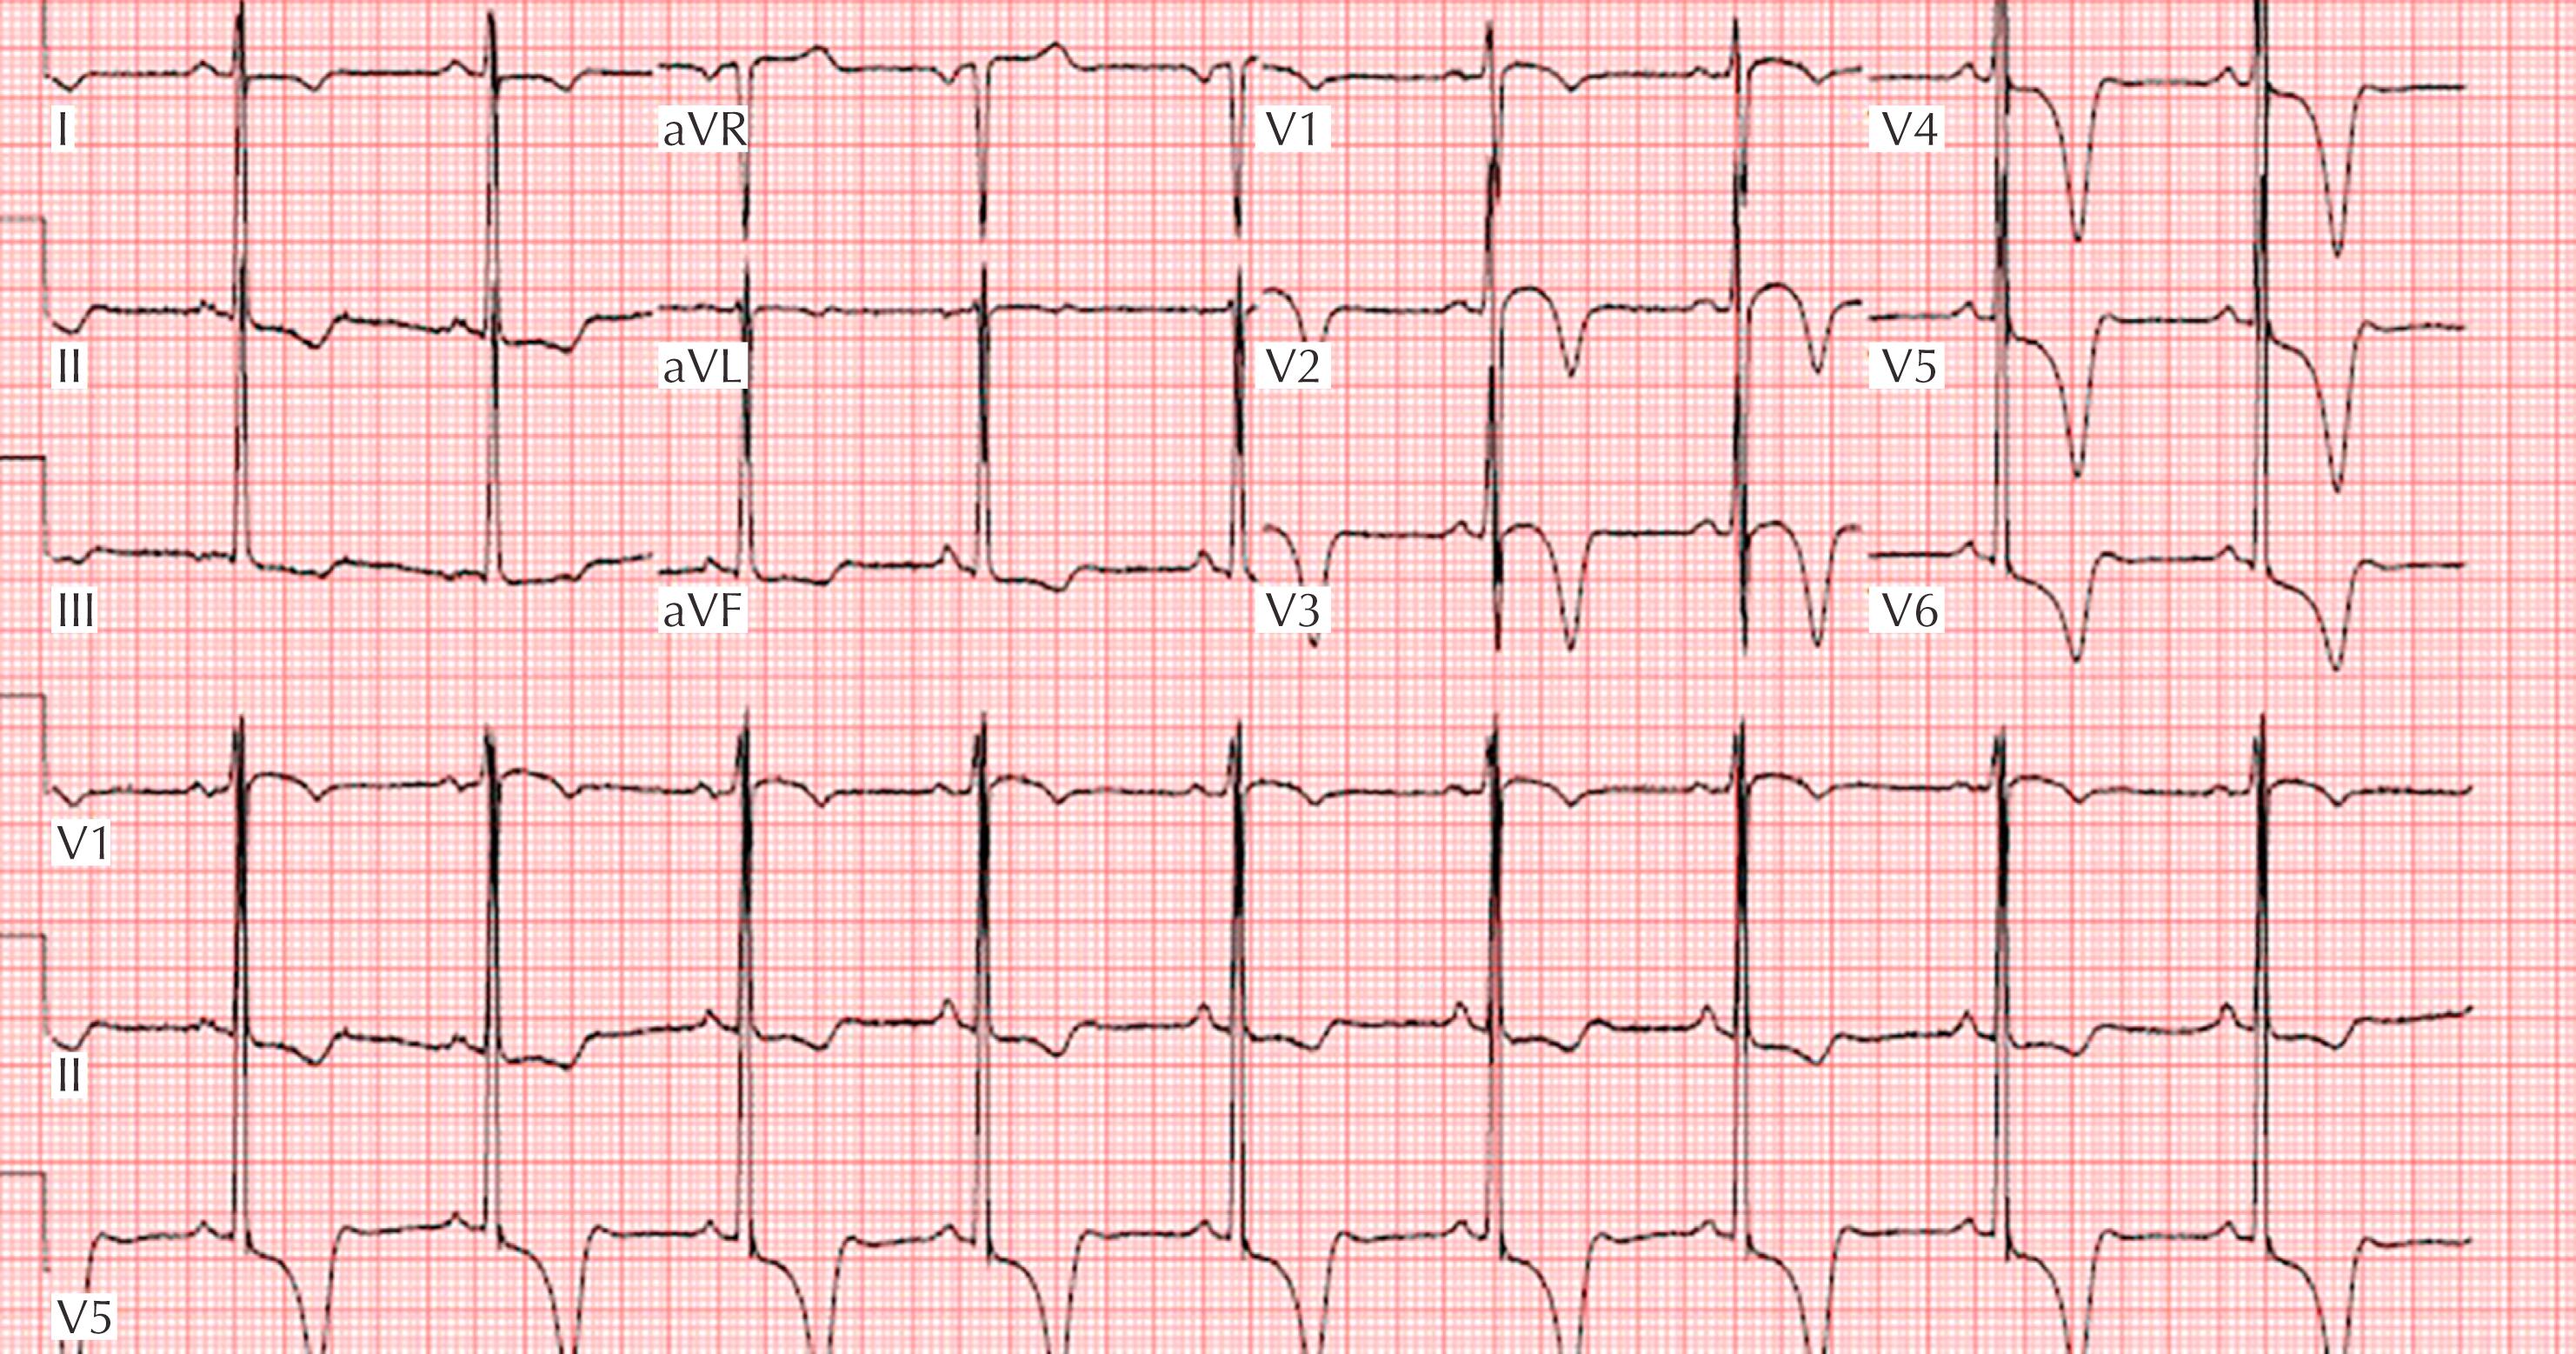 Figure 34.4, ECG from a patient with hypertrophic cardiomyopathy demonstrates deep T-wave inversion and ST-segment depression predominantly in the lateral precordial leads V 4 –V 6 .